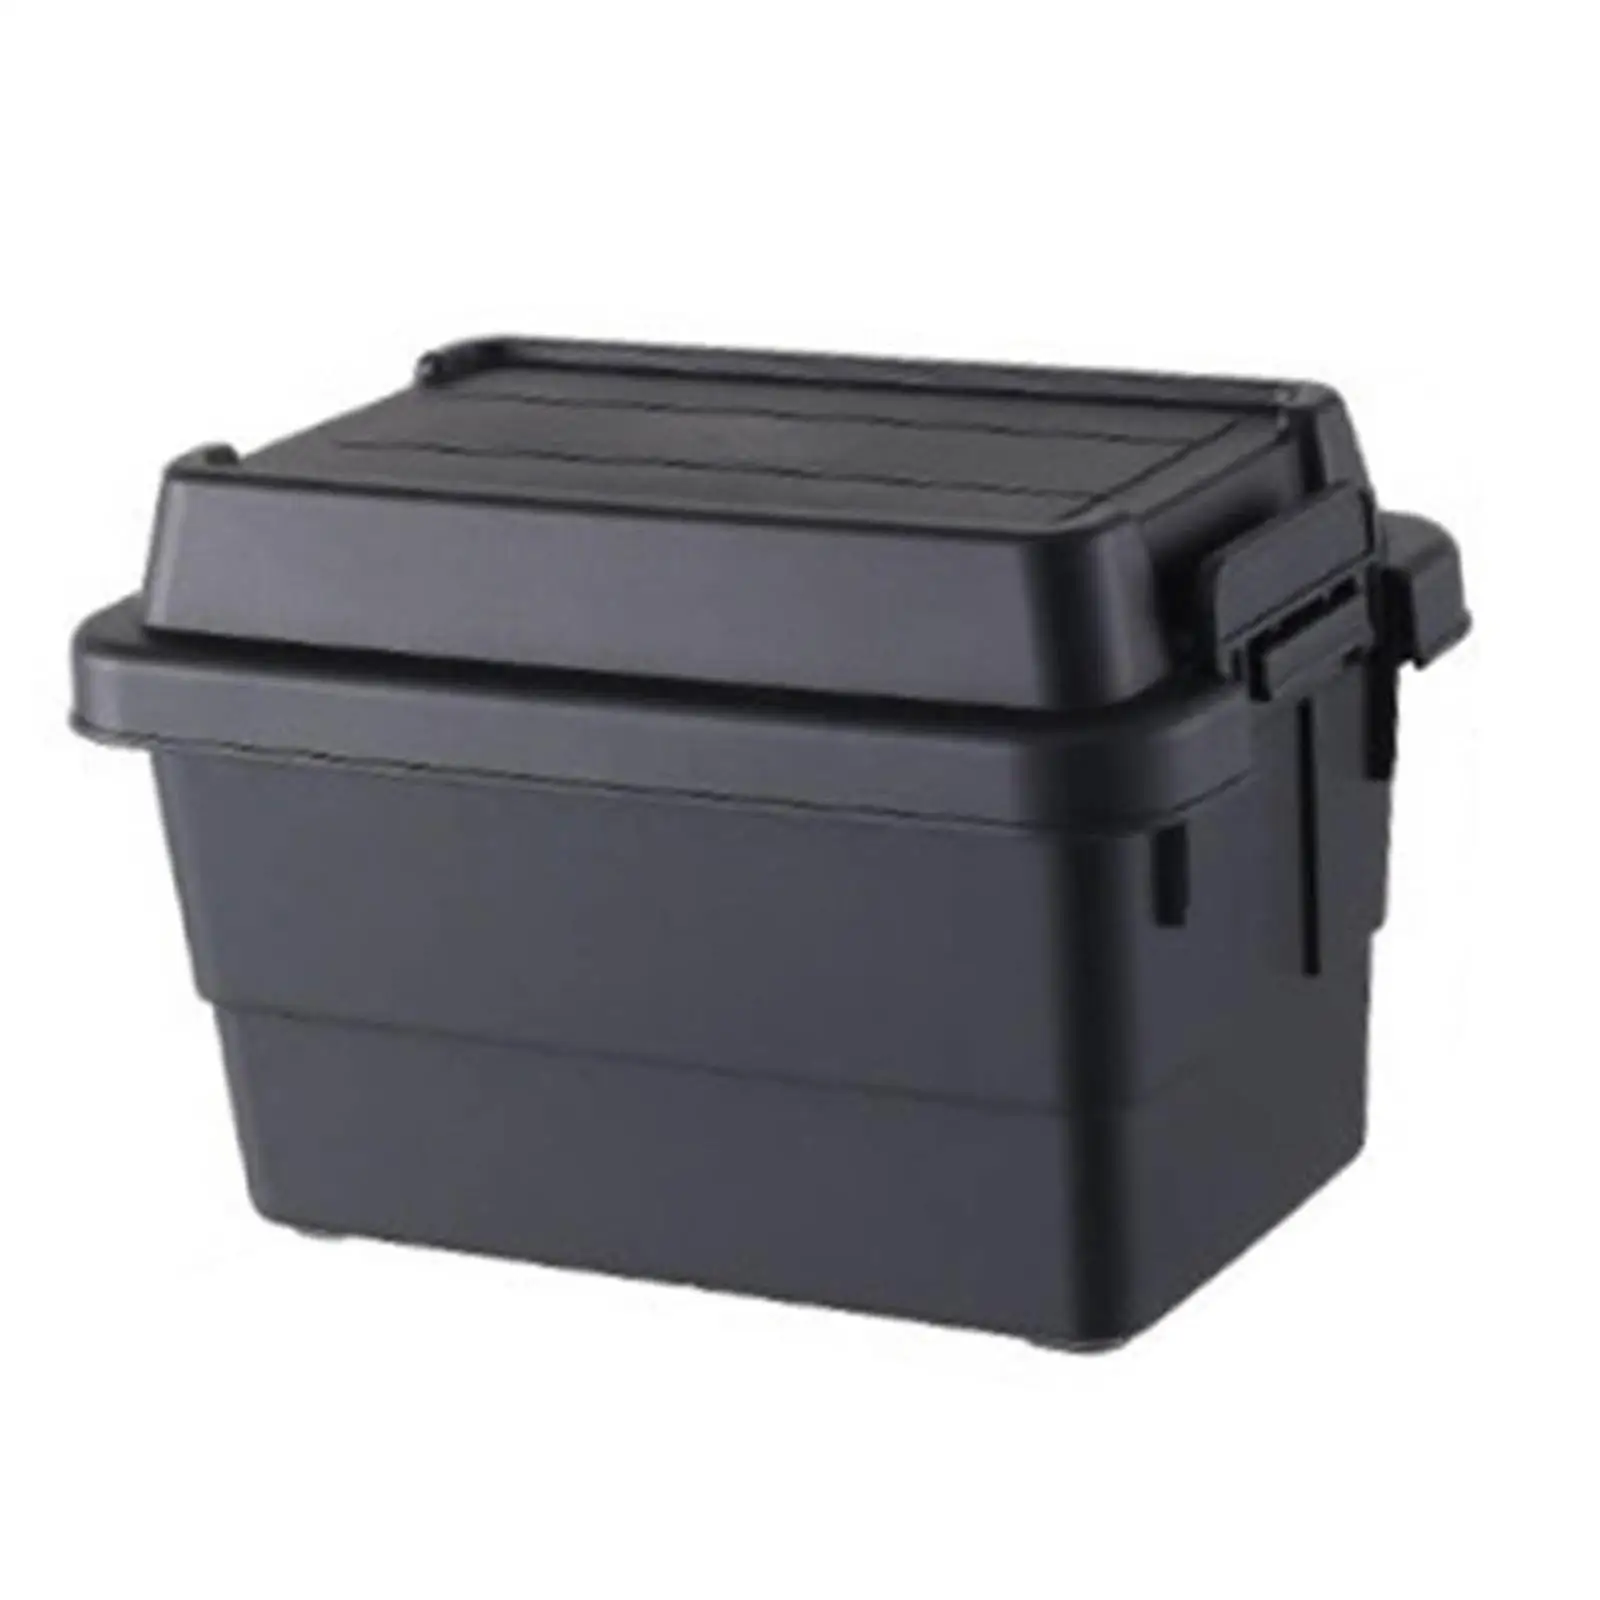 Camping Storage Box Multifunctional Storage Bin with Lid for Travel Hiking Fishing Backpacking Outdoor Activities